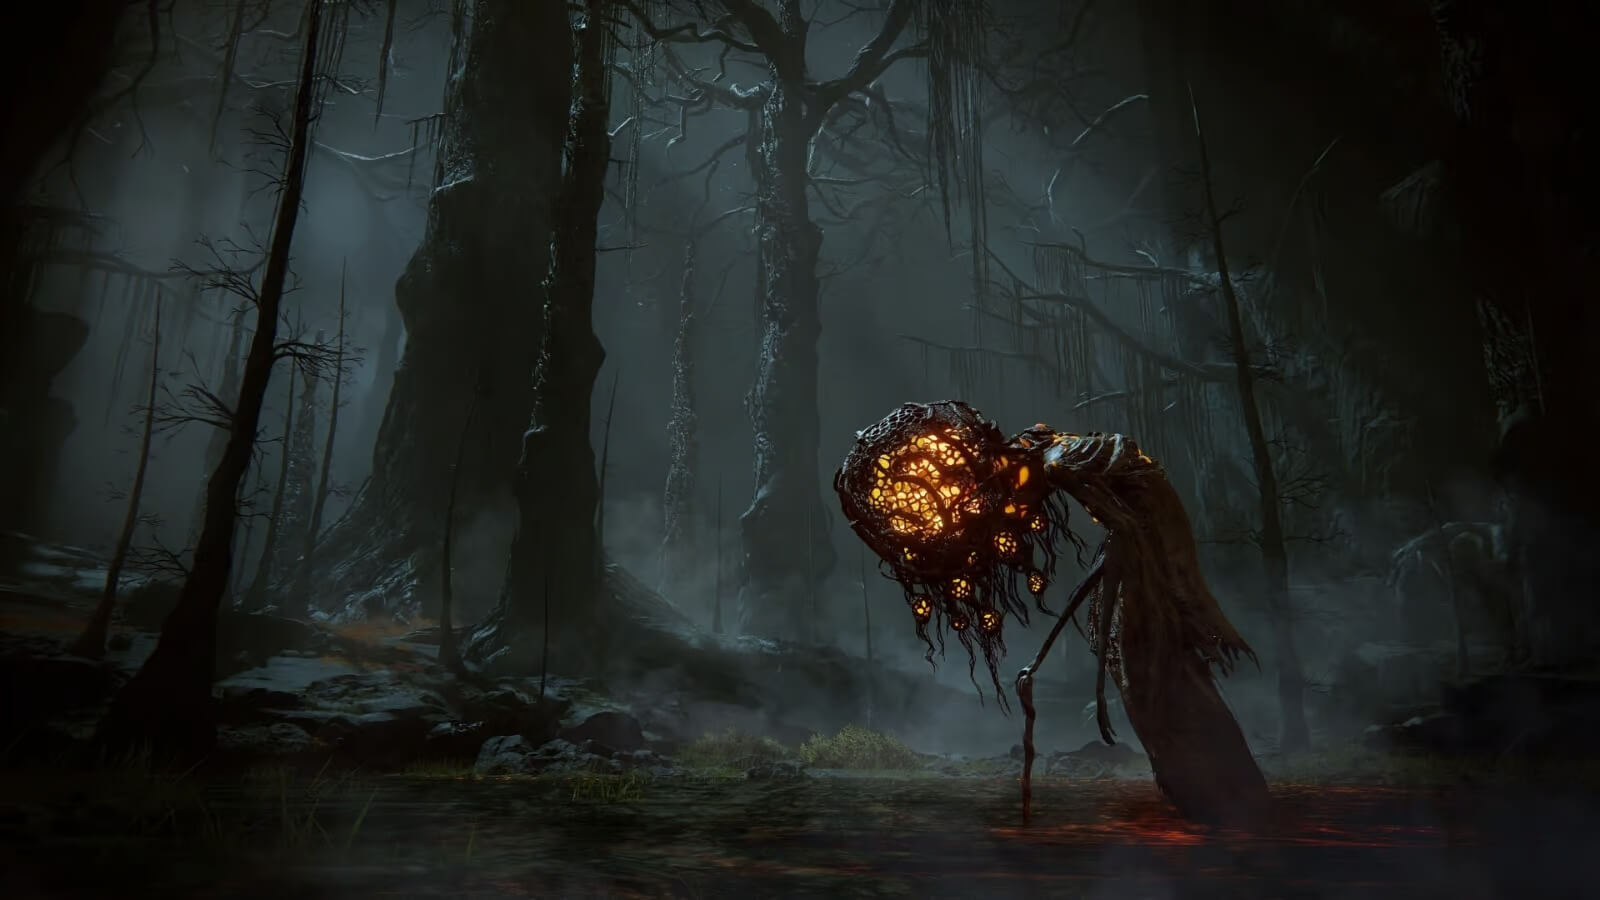 Prepare yourself for the Deathblight swamp